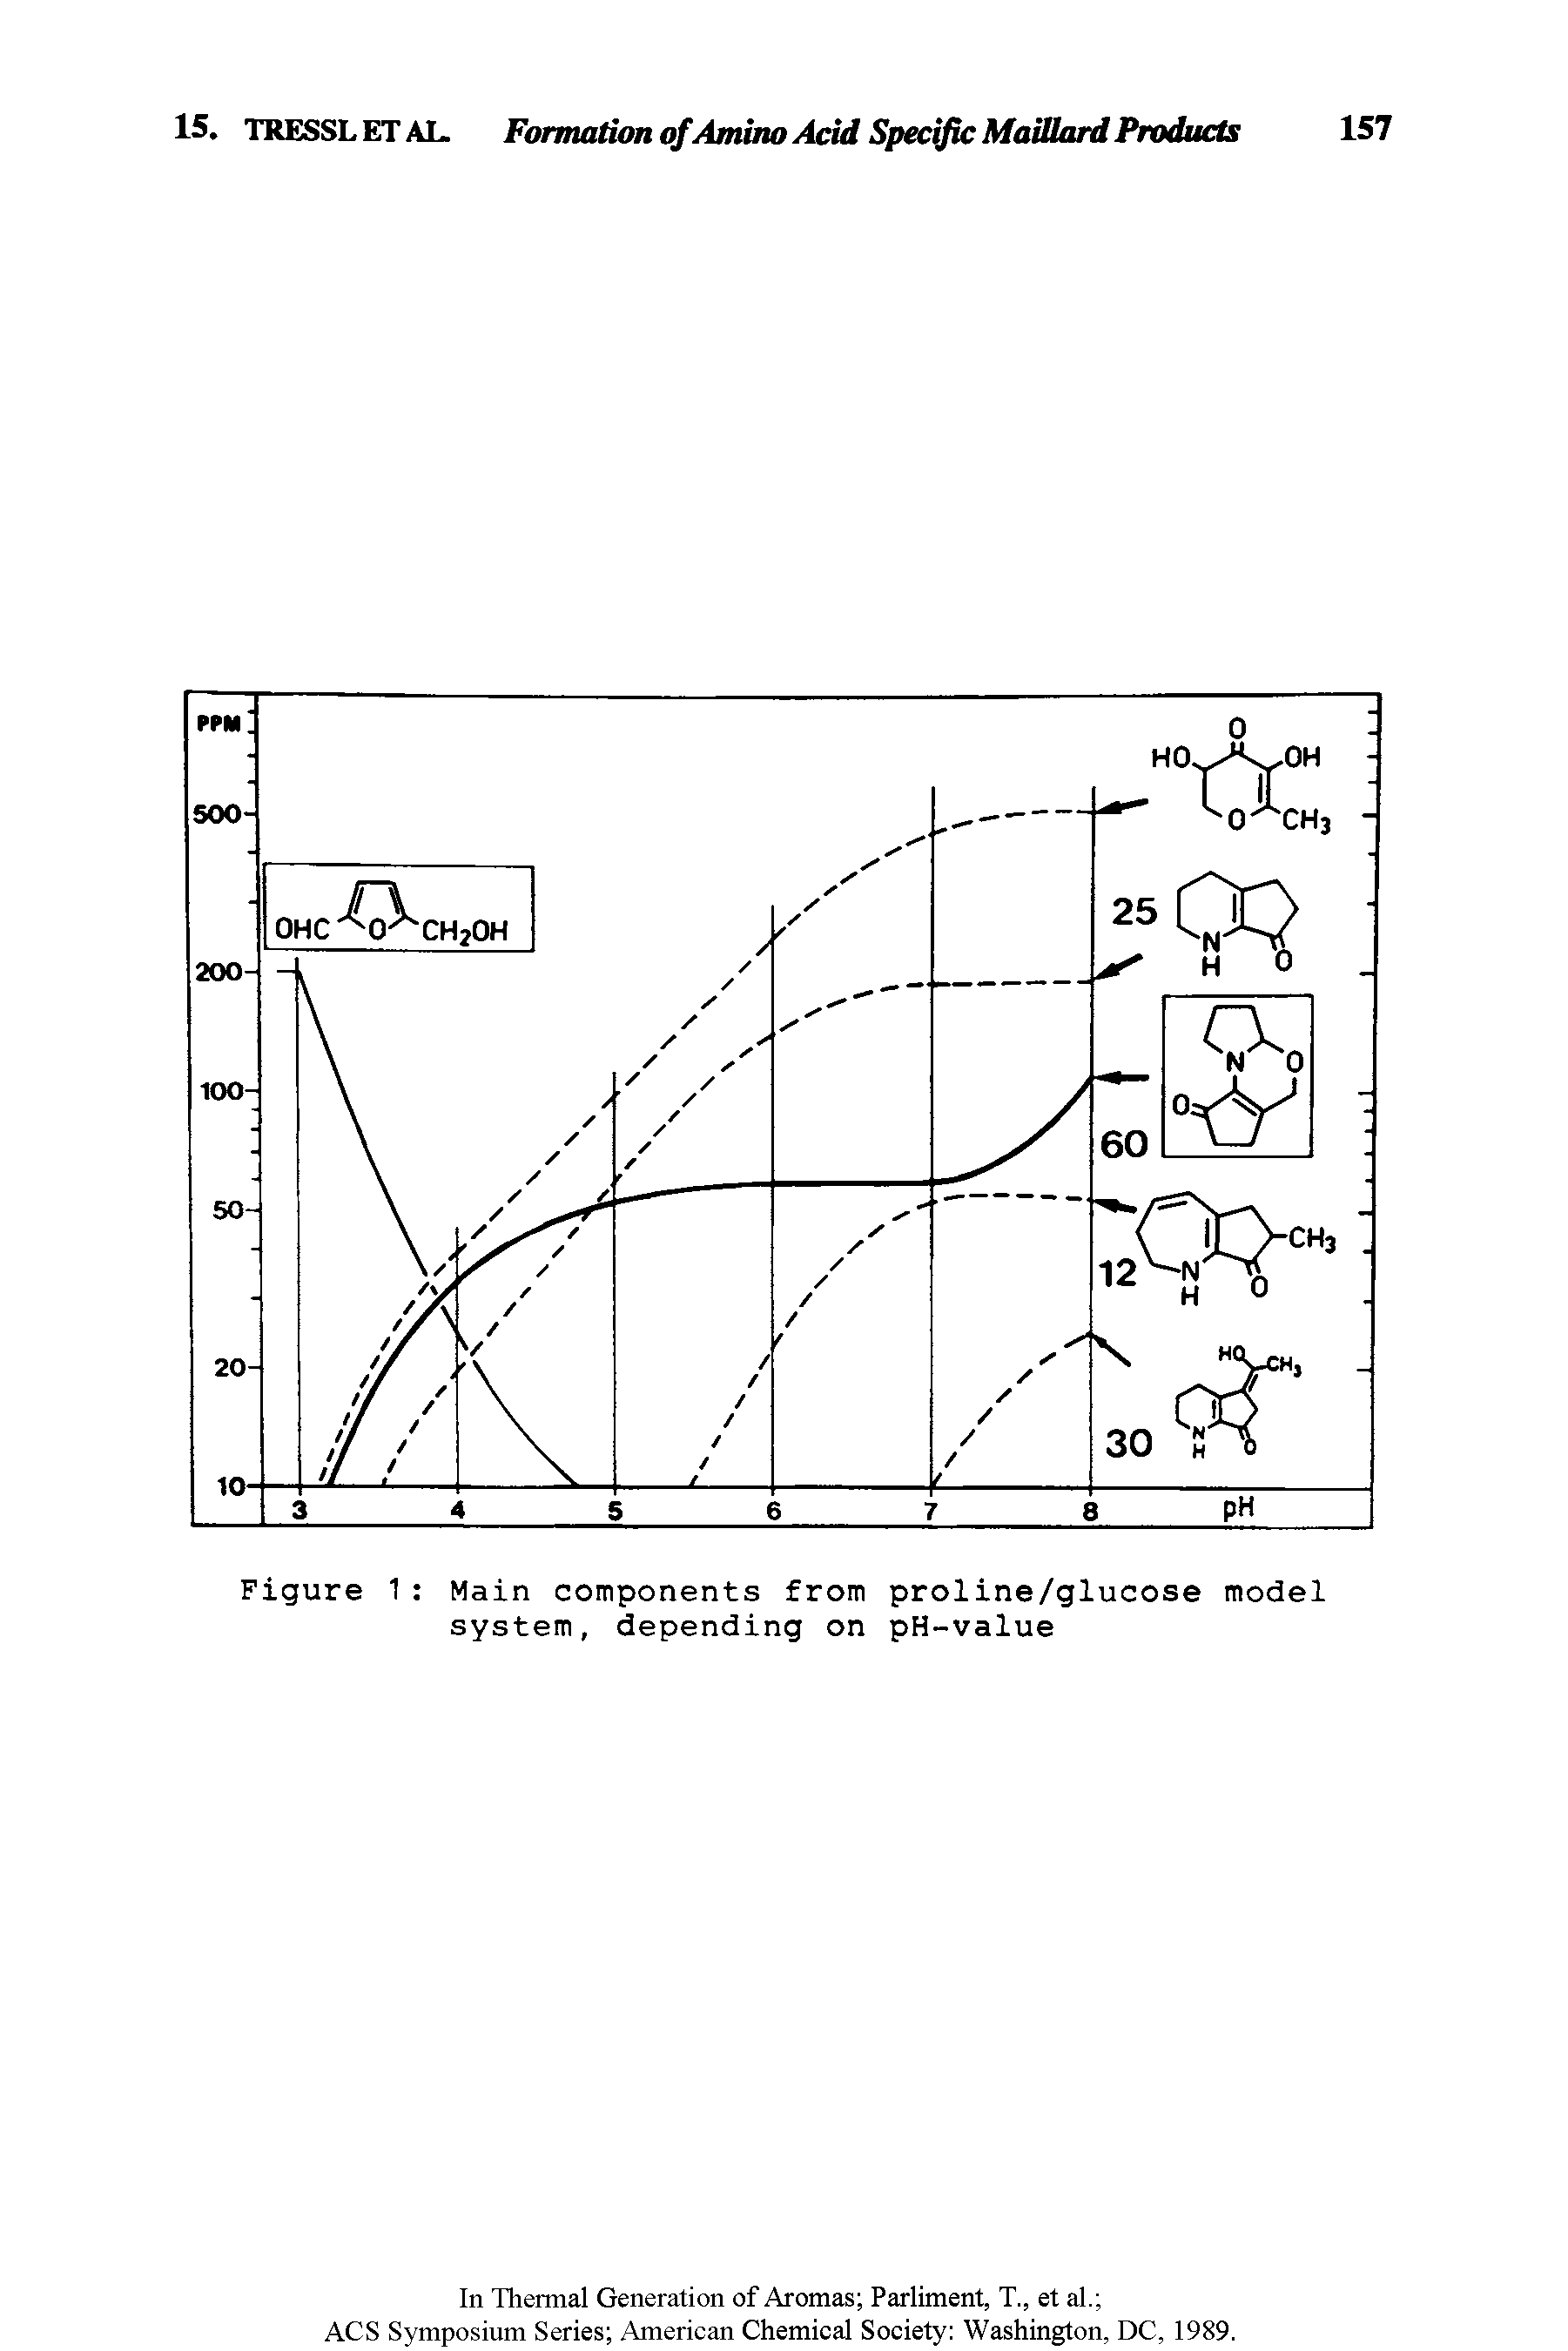 Figure 1 Main components from proline/glucose model system, depending on pH-value...